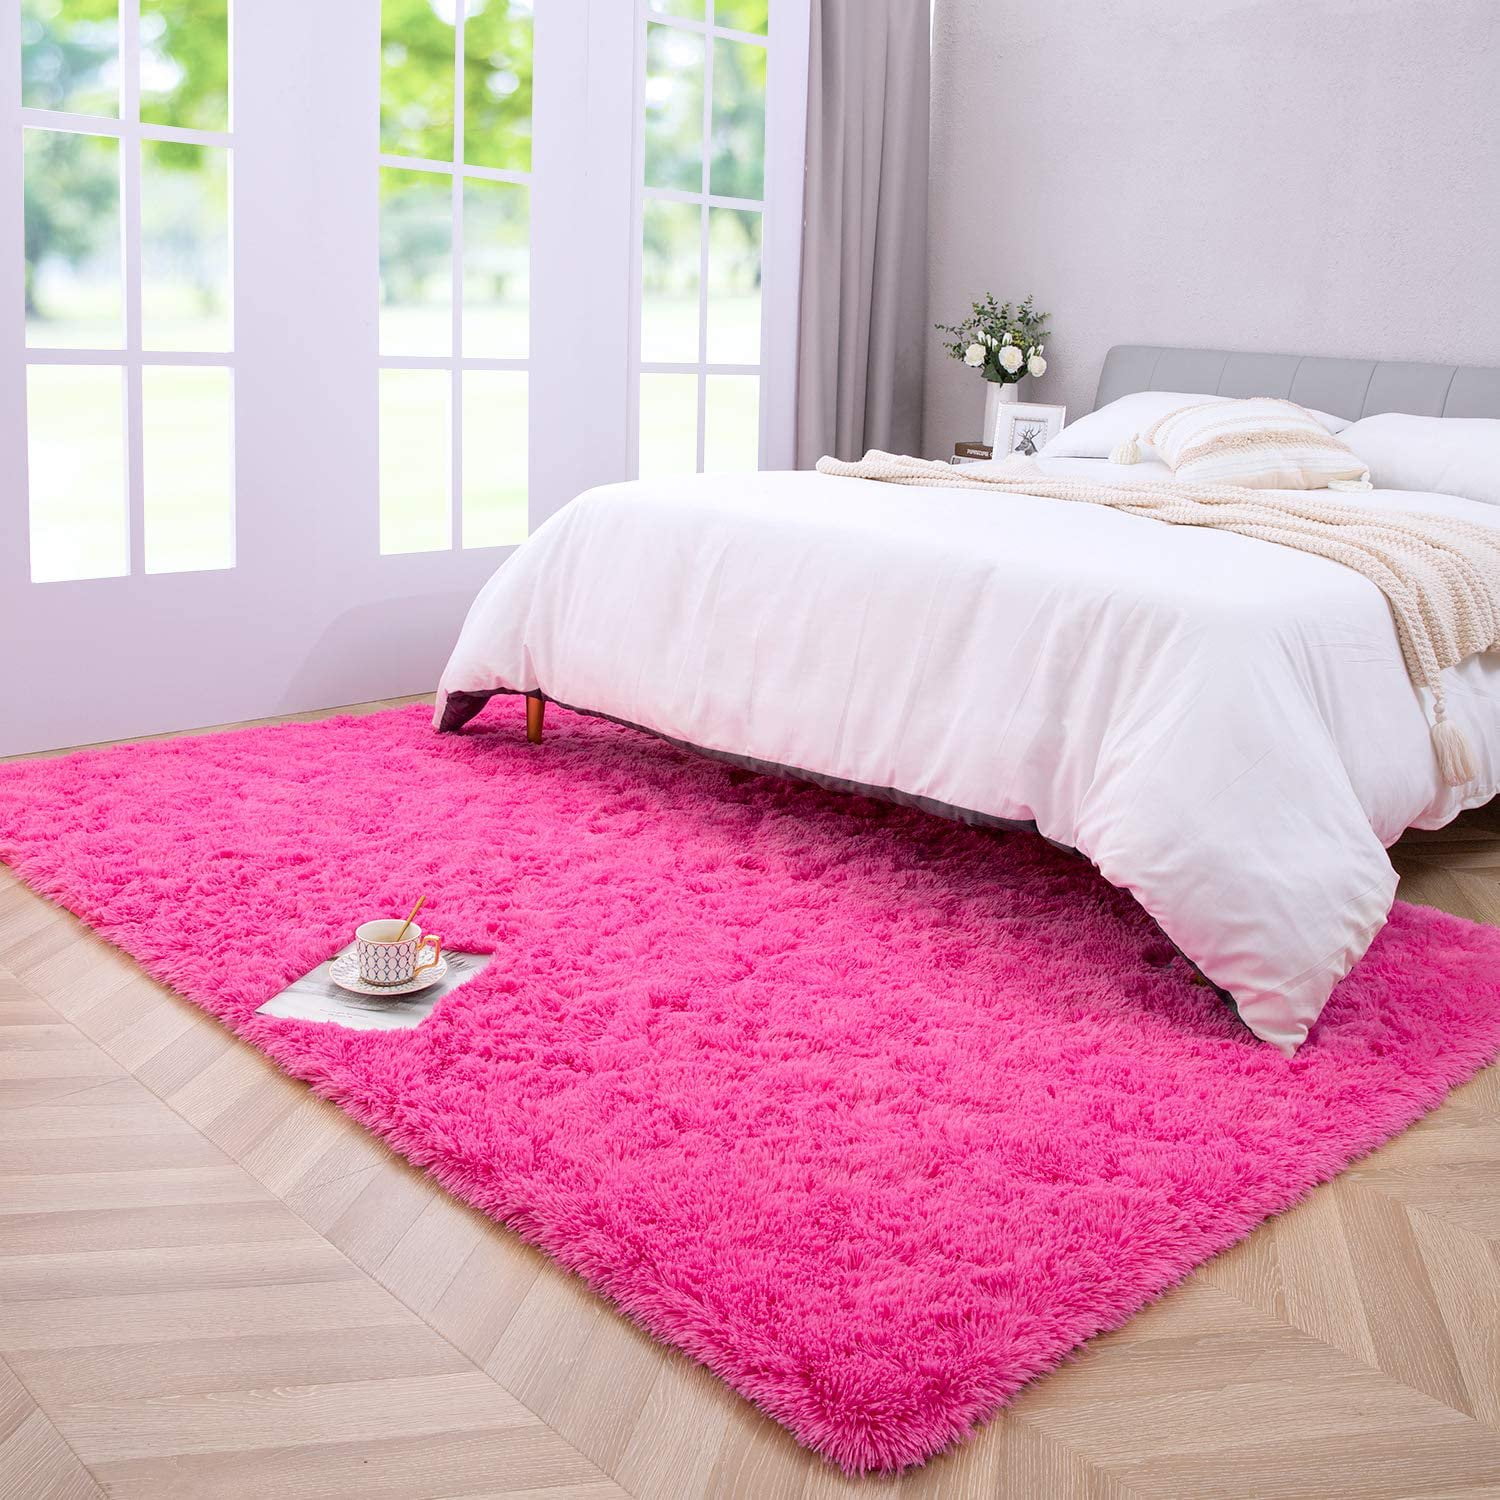 Ophanie Light Pink Area Rugs for Bedroom Girls, Fluffy Fuzzy Furry Shag  Carpet, Plush Soft Cute Kids Baby Shaggy Bedside 4x5.3 Indoor Floor Rug for